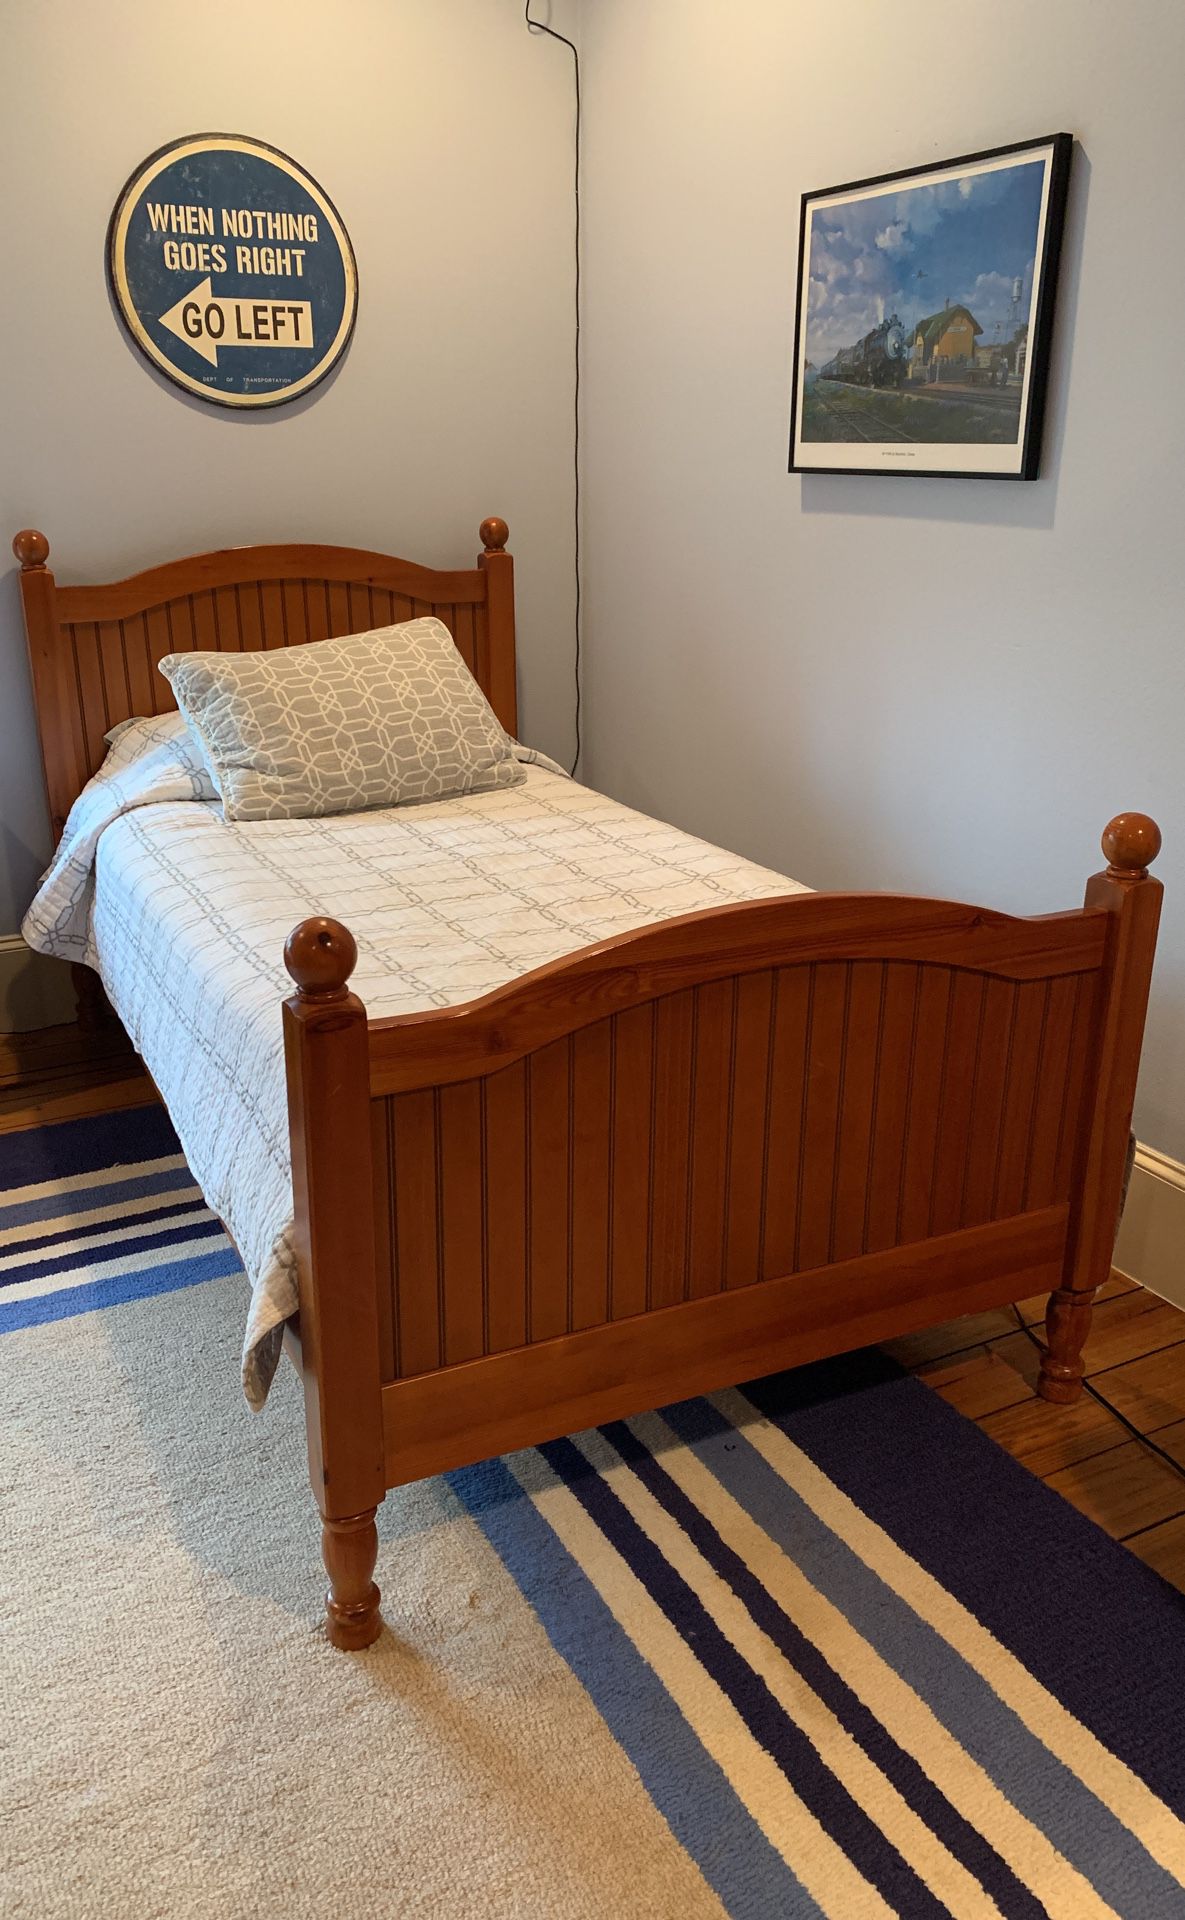 Two Pottery Barn twin beds with mattresses and linens